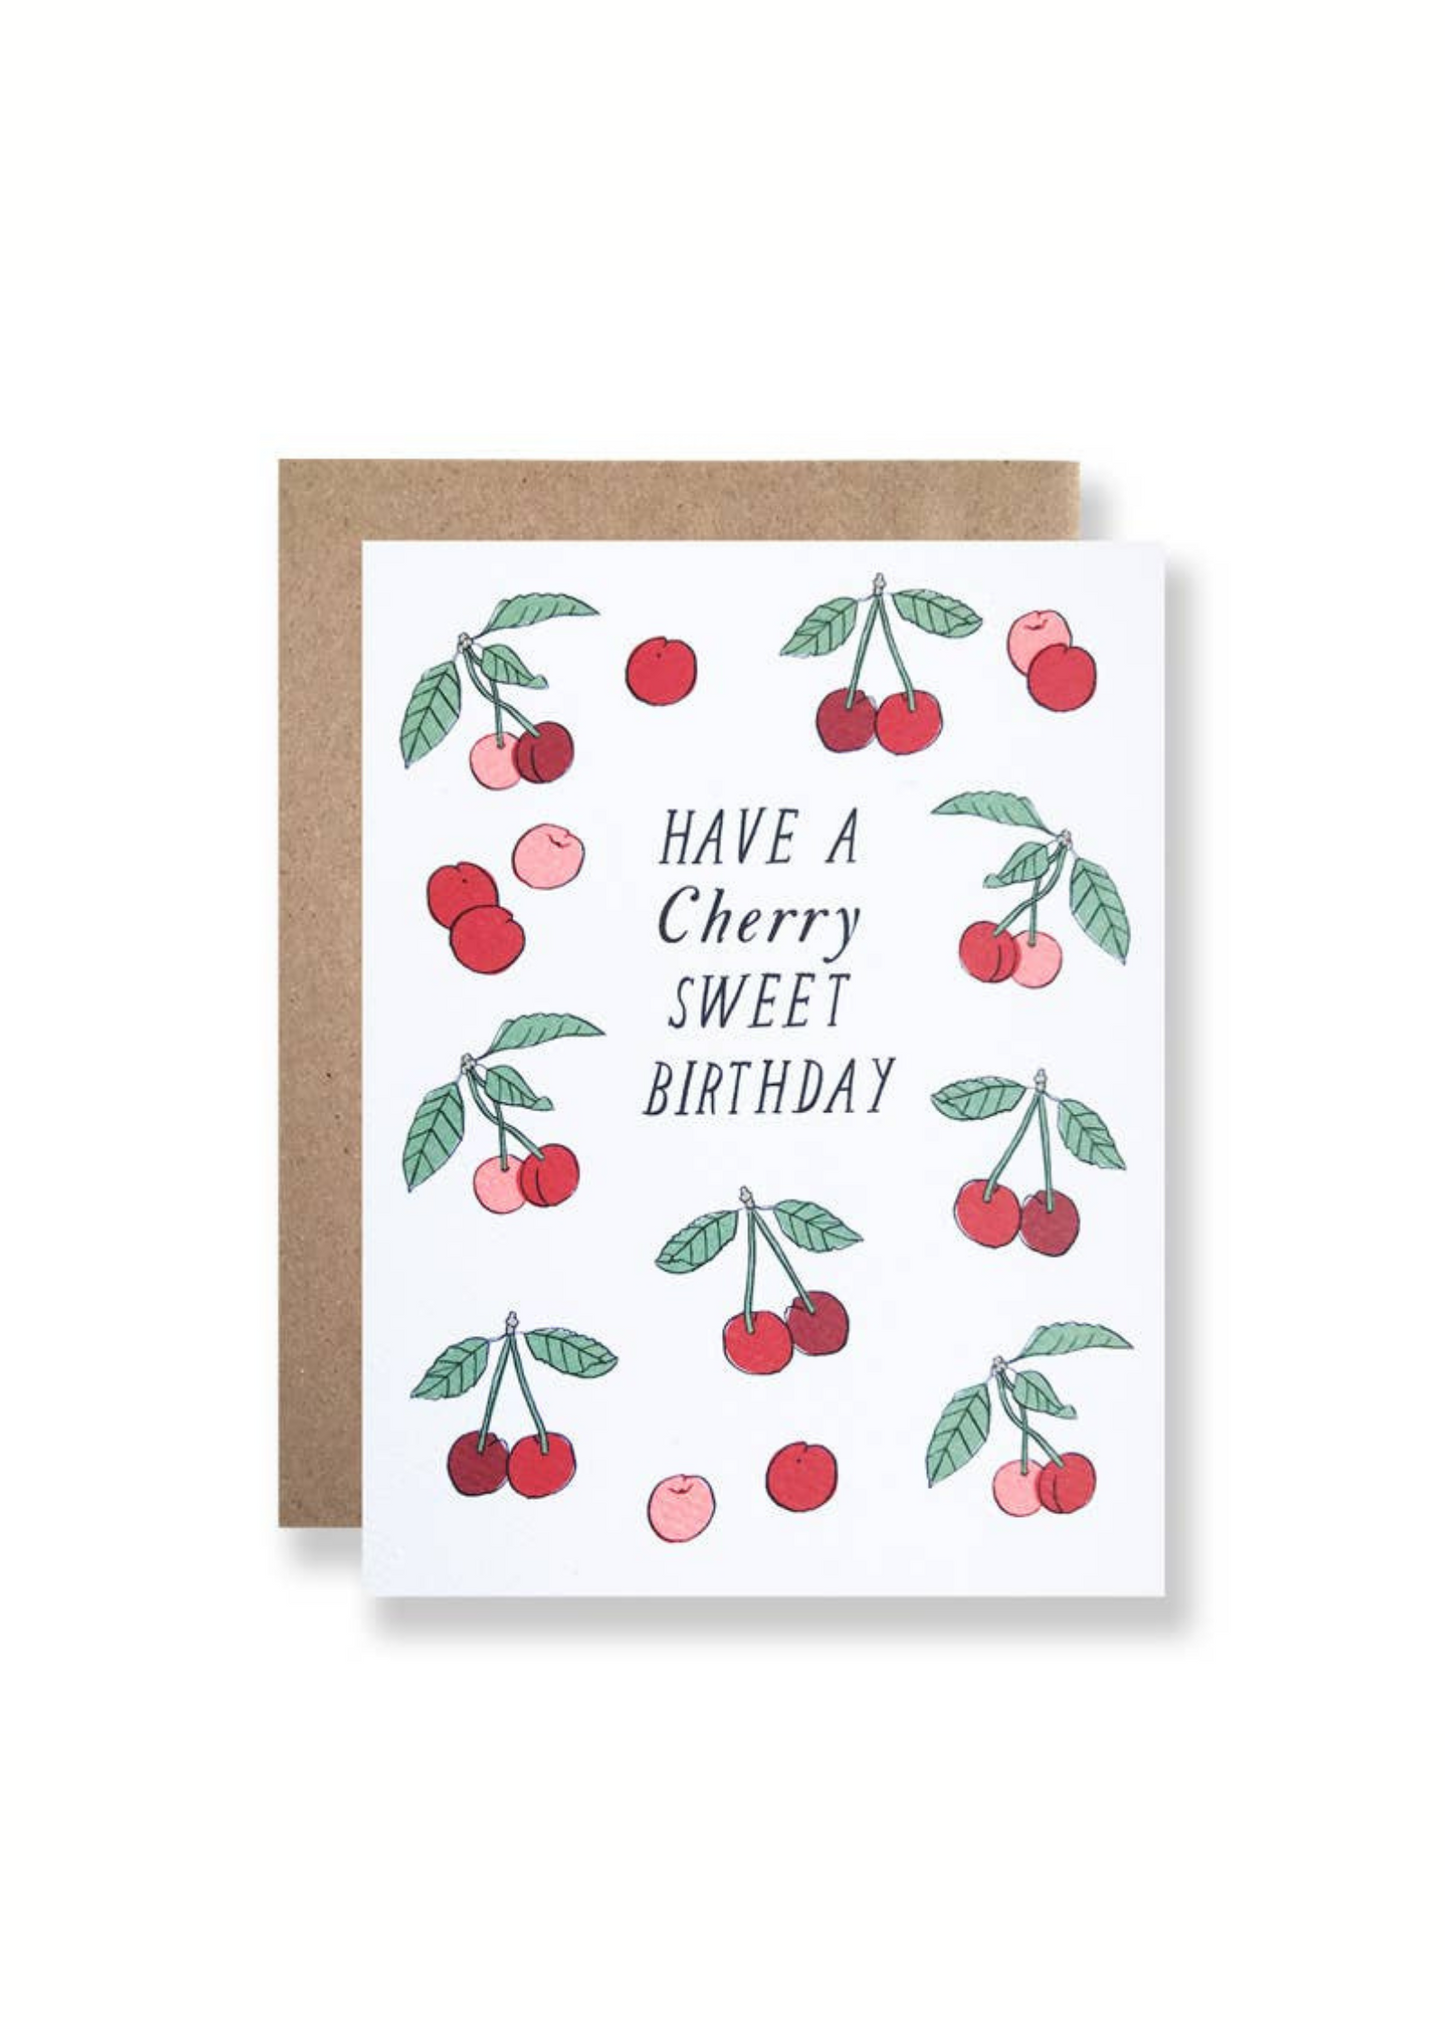 Have a Cherry Sweet Birthday Card